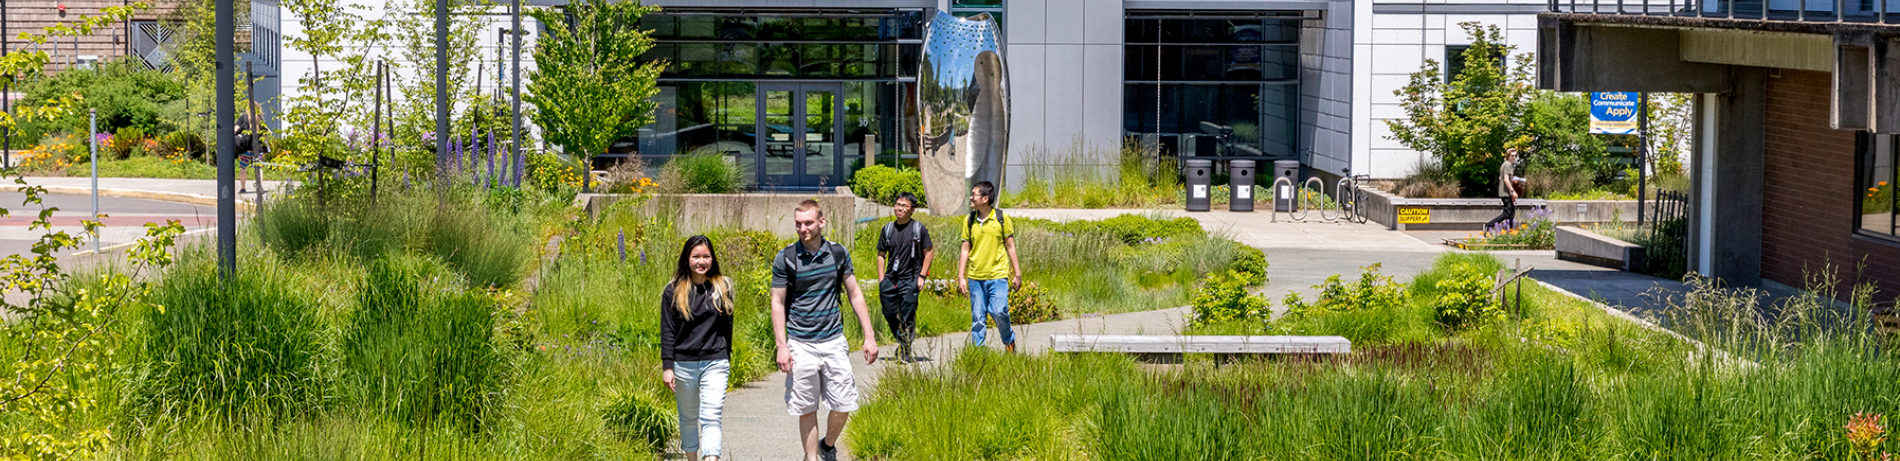 students walking on main campus in the sun